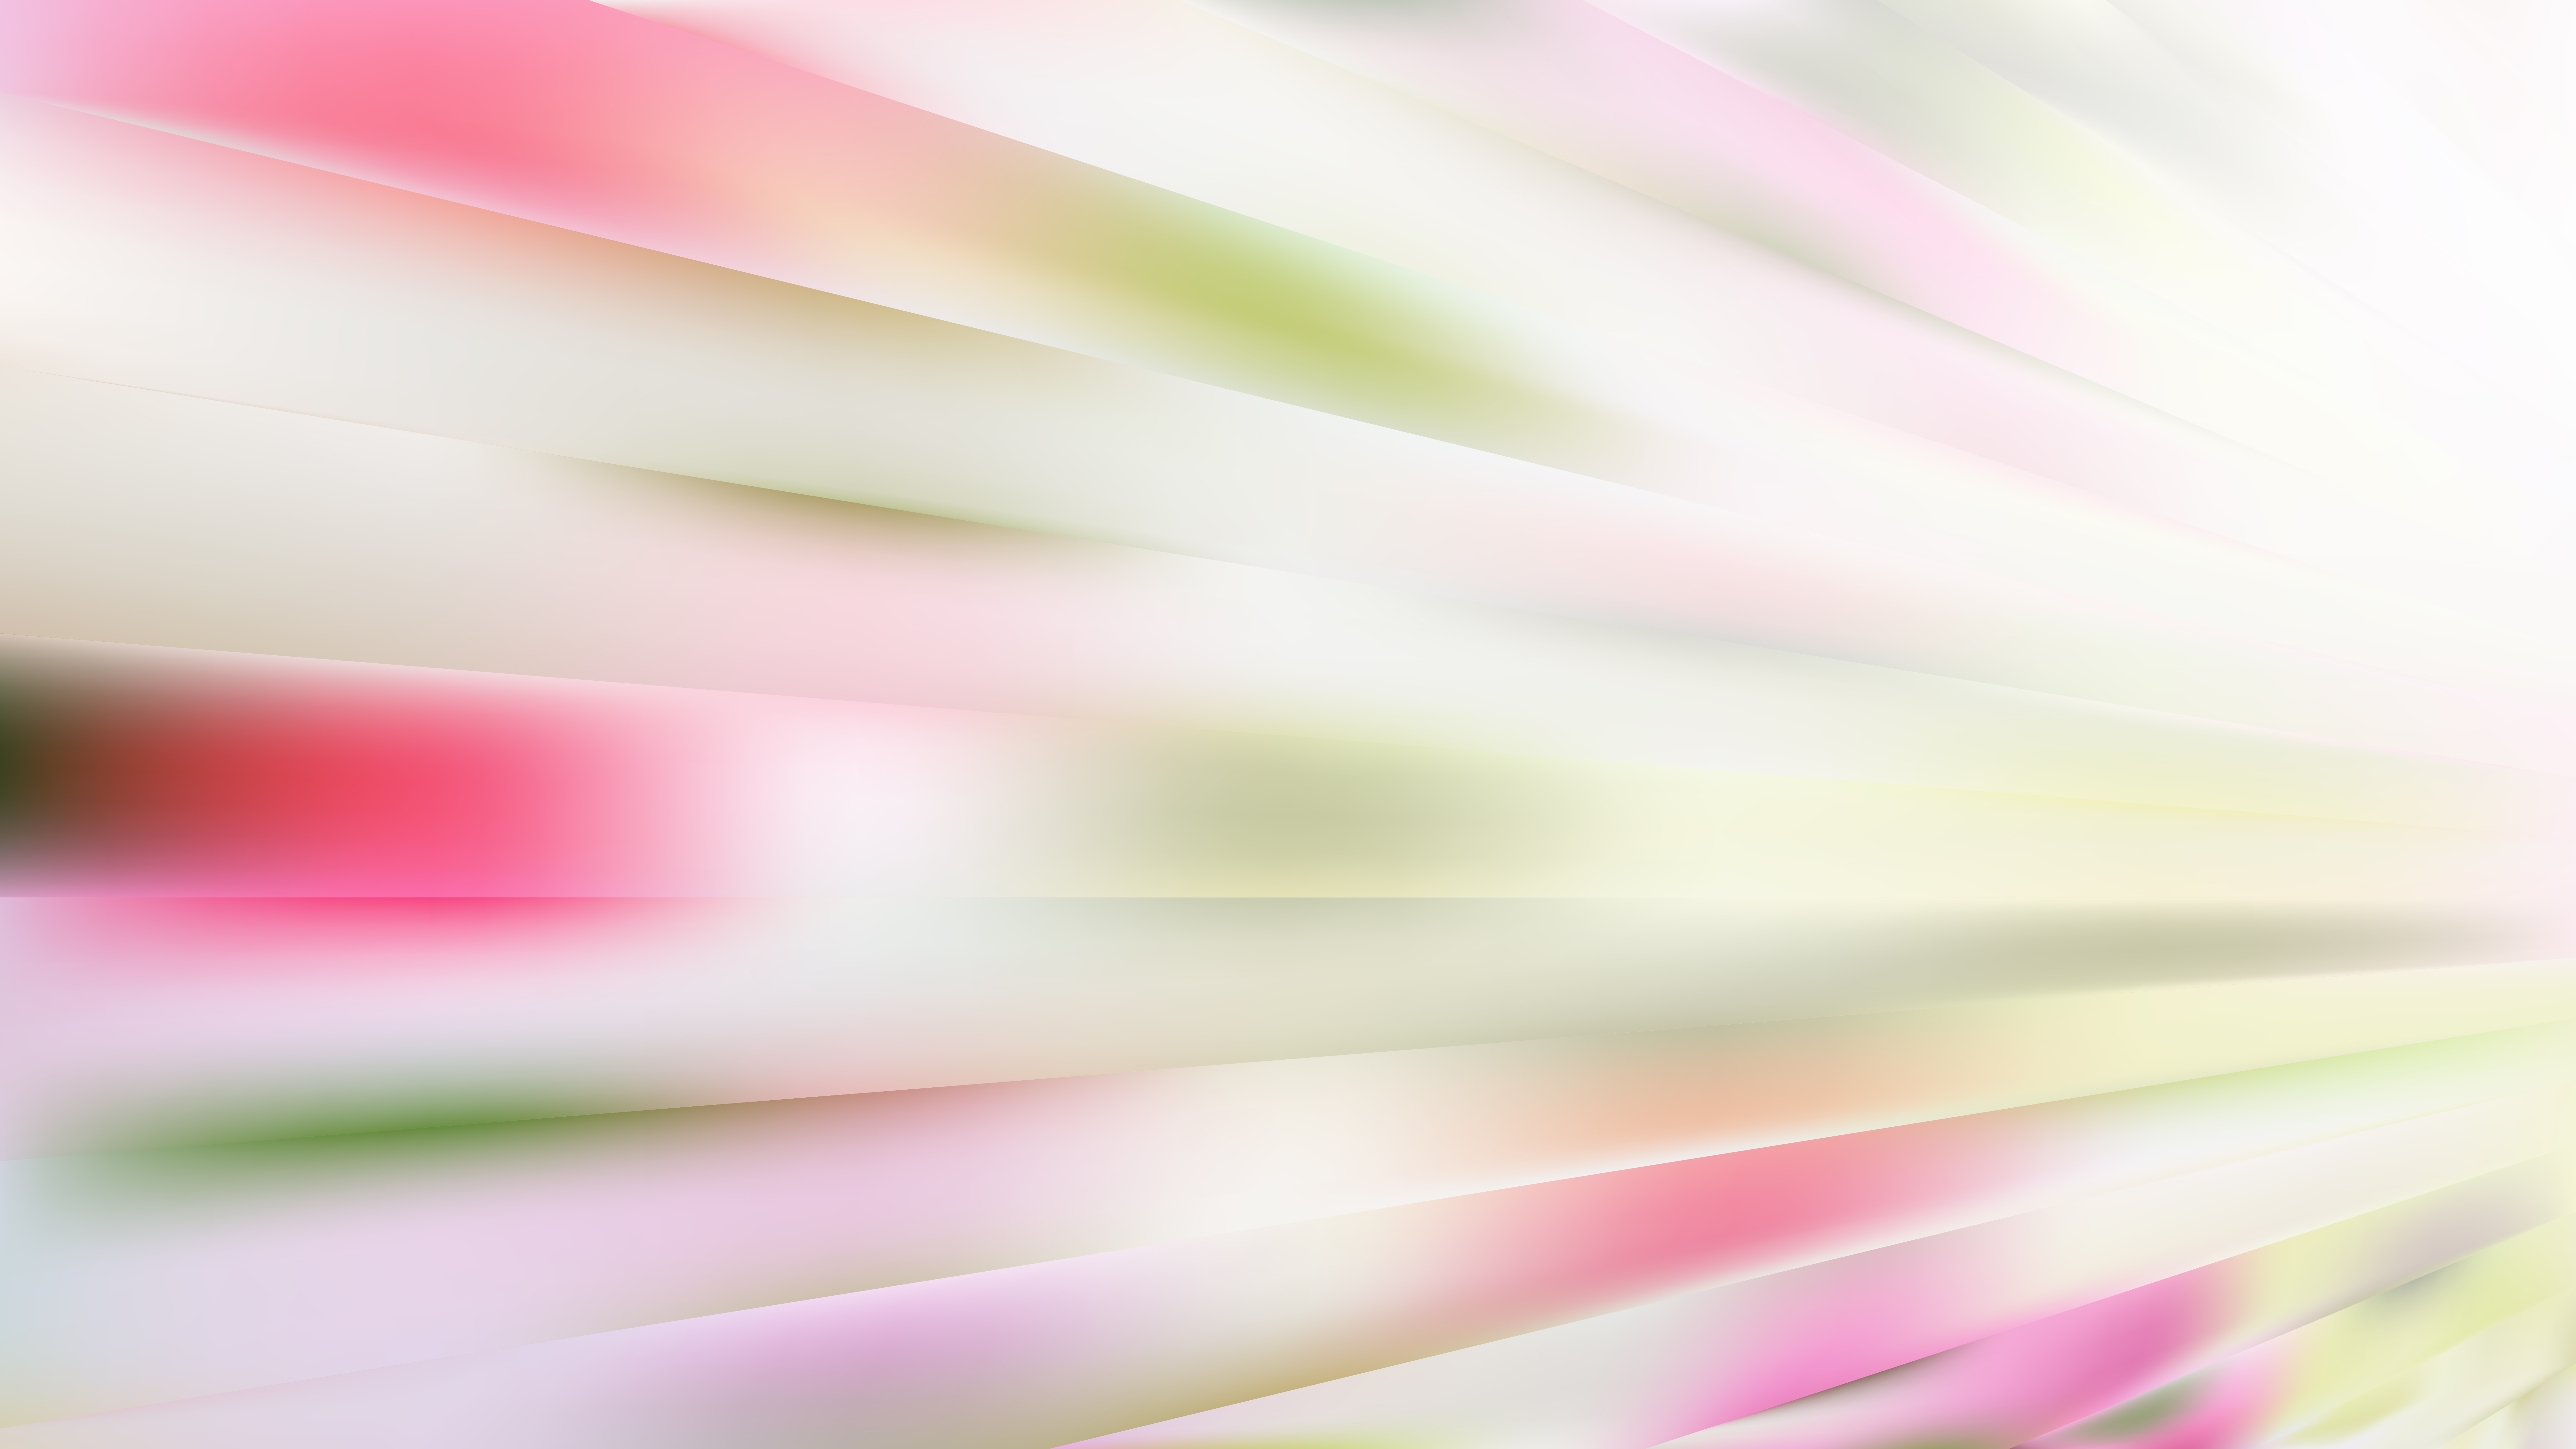 Free Abstract Light Color Lines Background Image